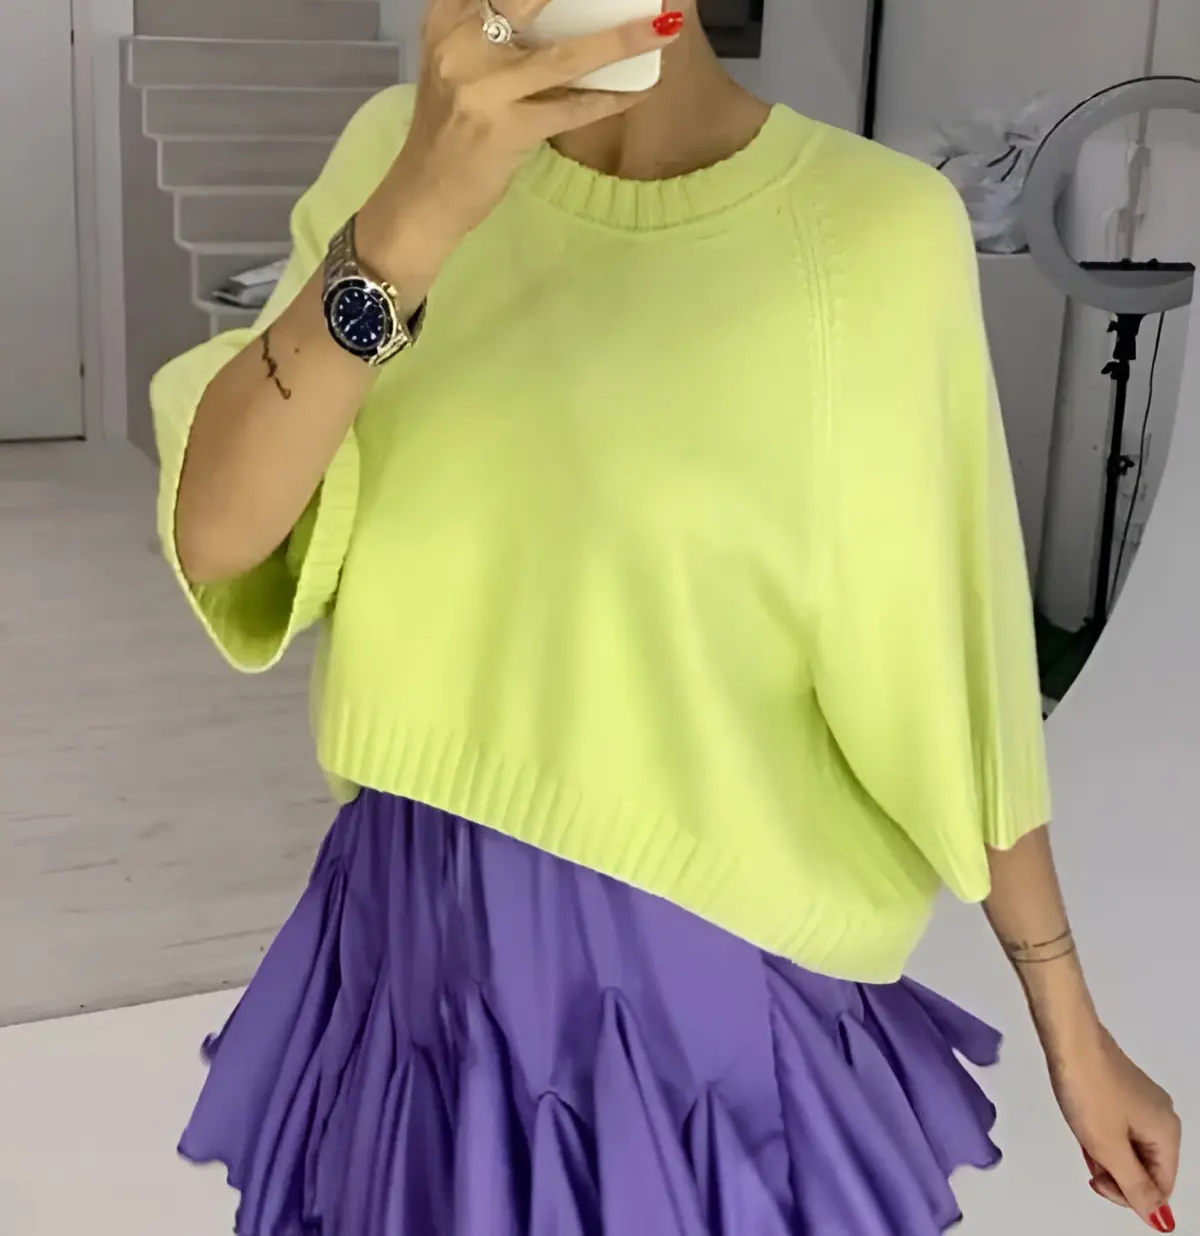 satin purple skirt paired with yellow blouse